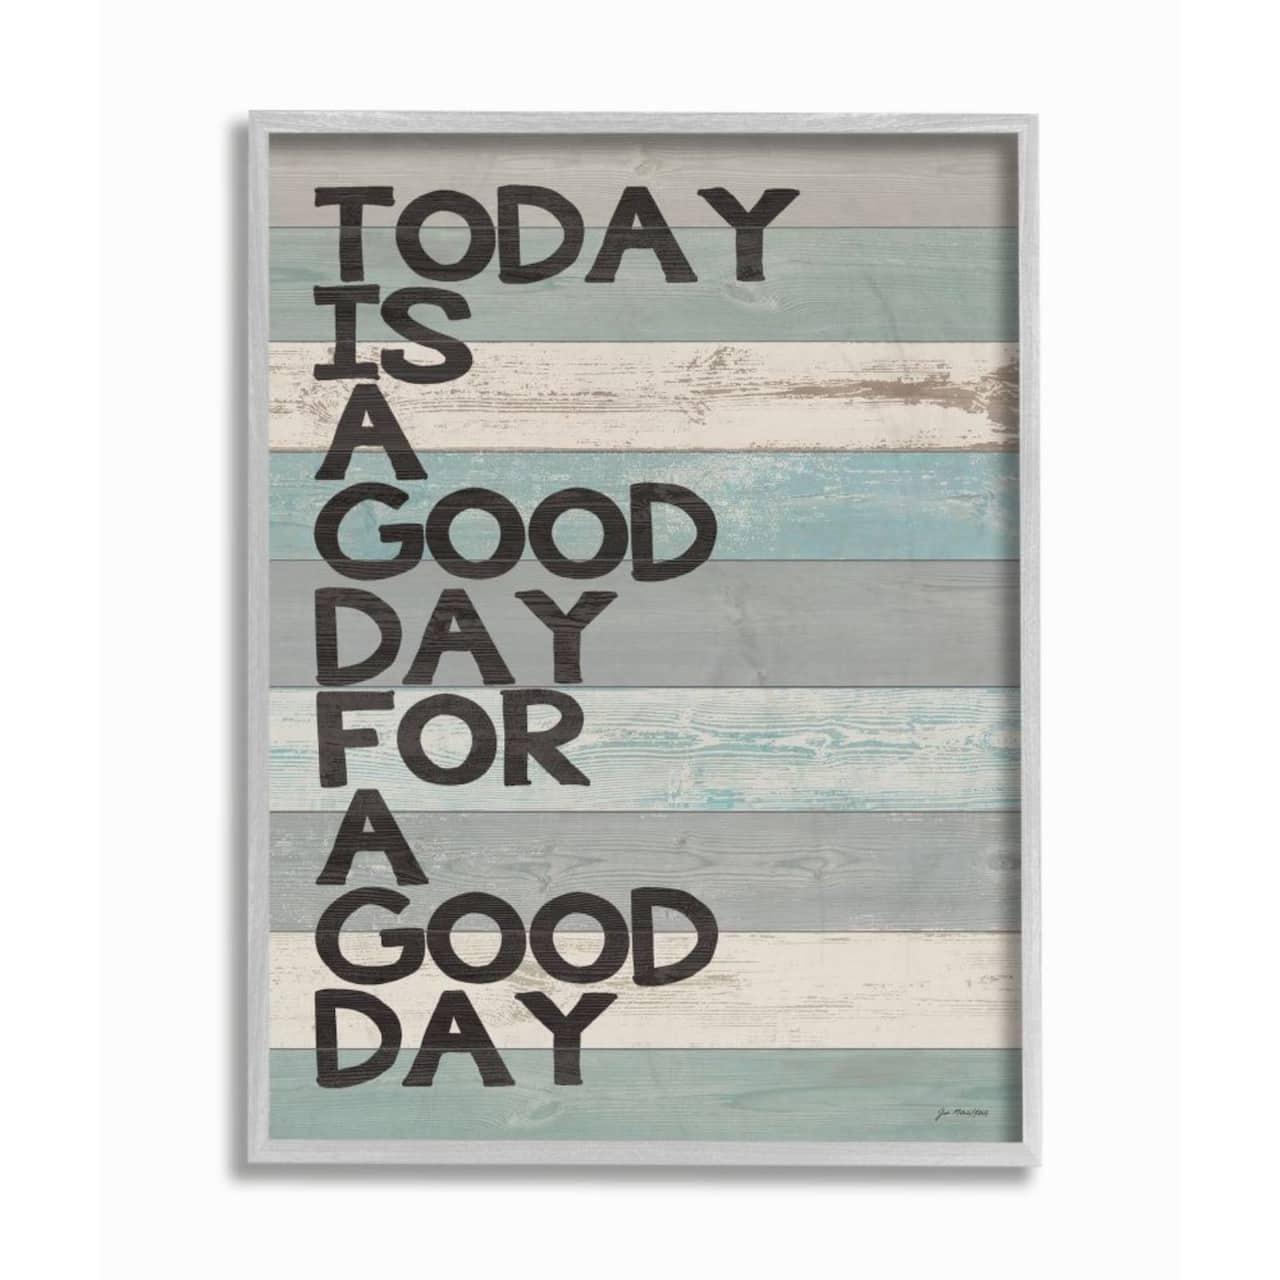 Stupell Industries A Good Day for a Good Day with Gray Frame Wall Accent